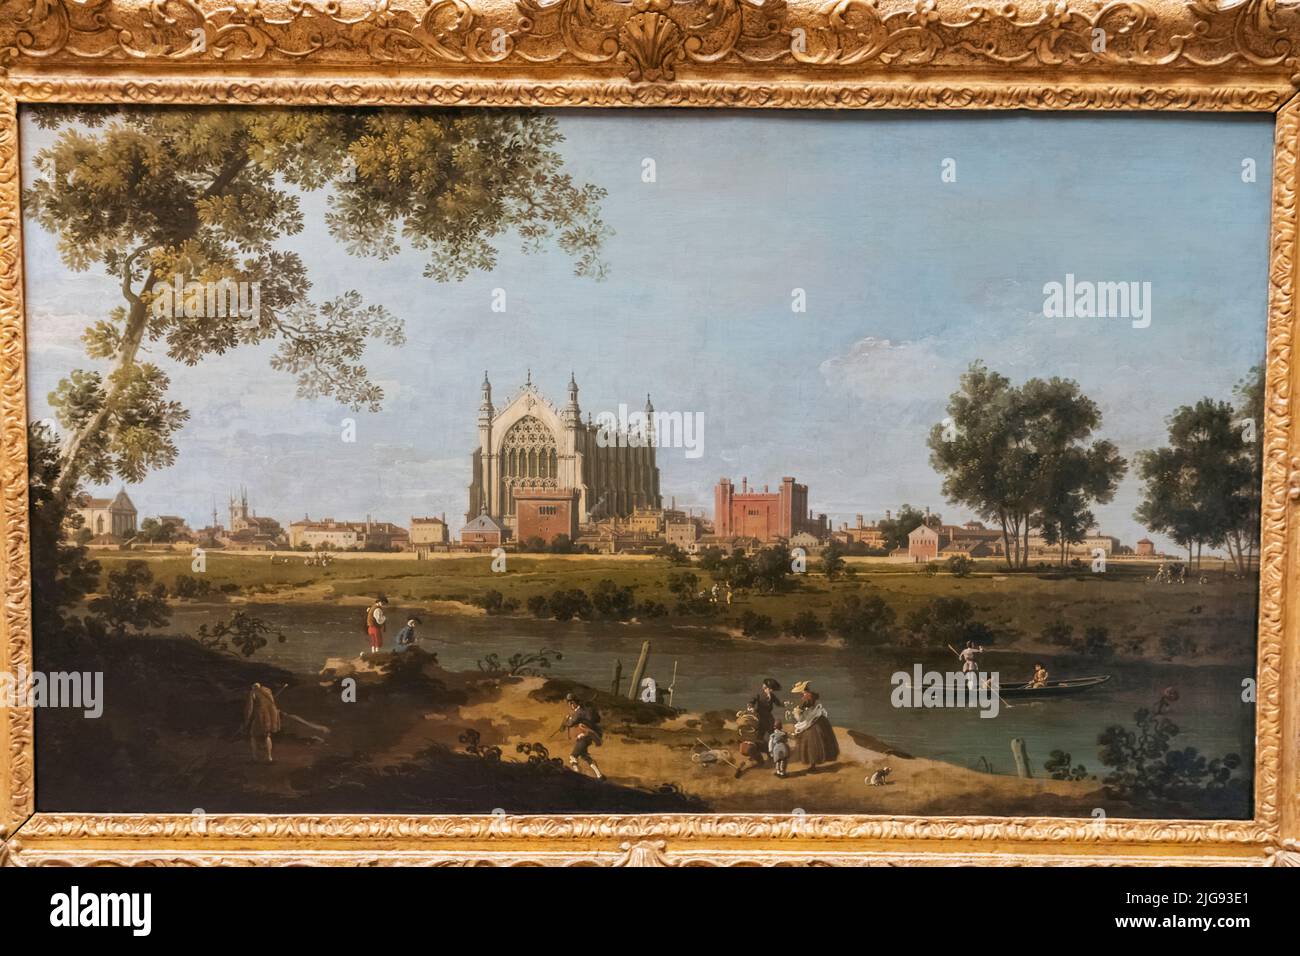 Painting titled 'Eton College' by Italian Artist Canaletto dated 1754 Stock Photo